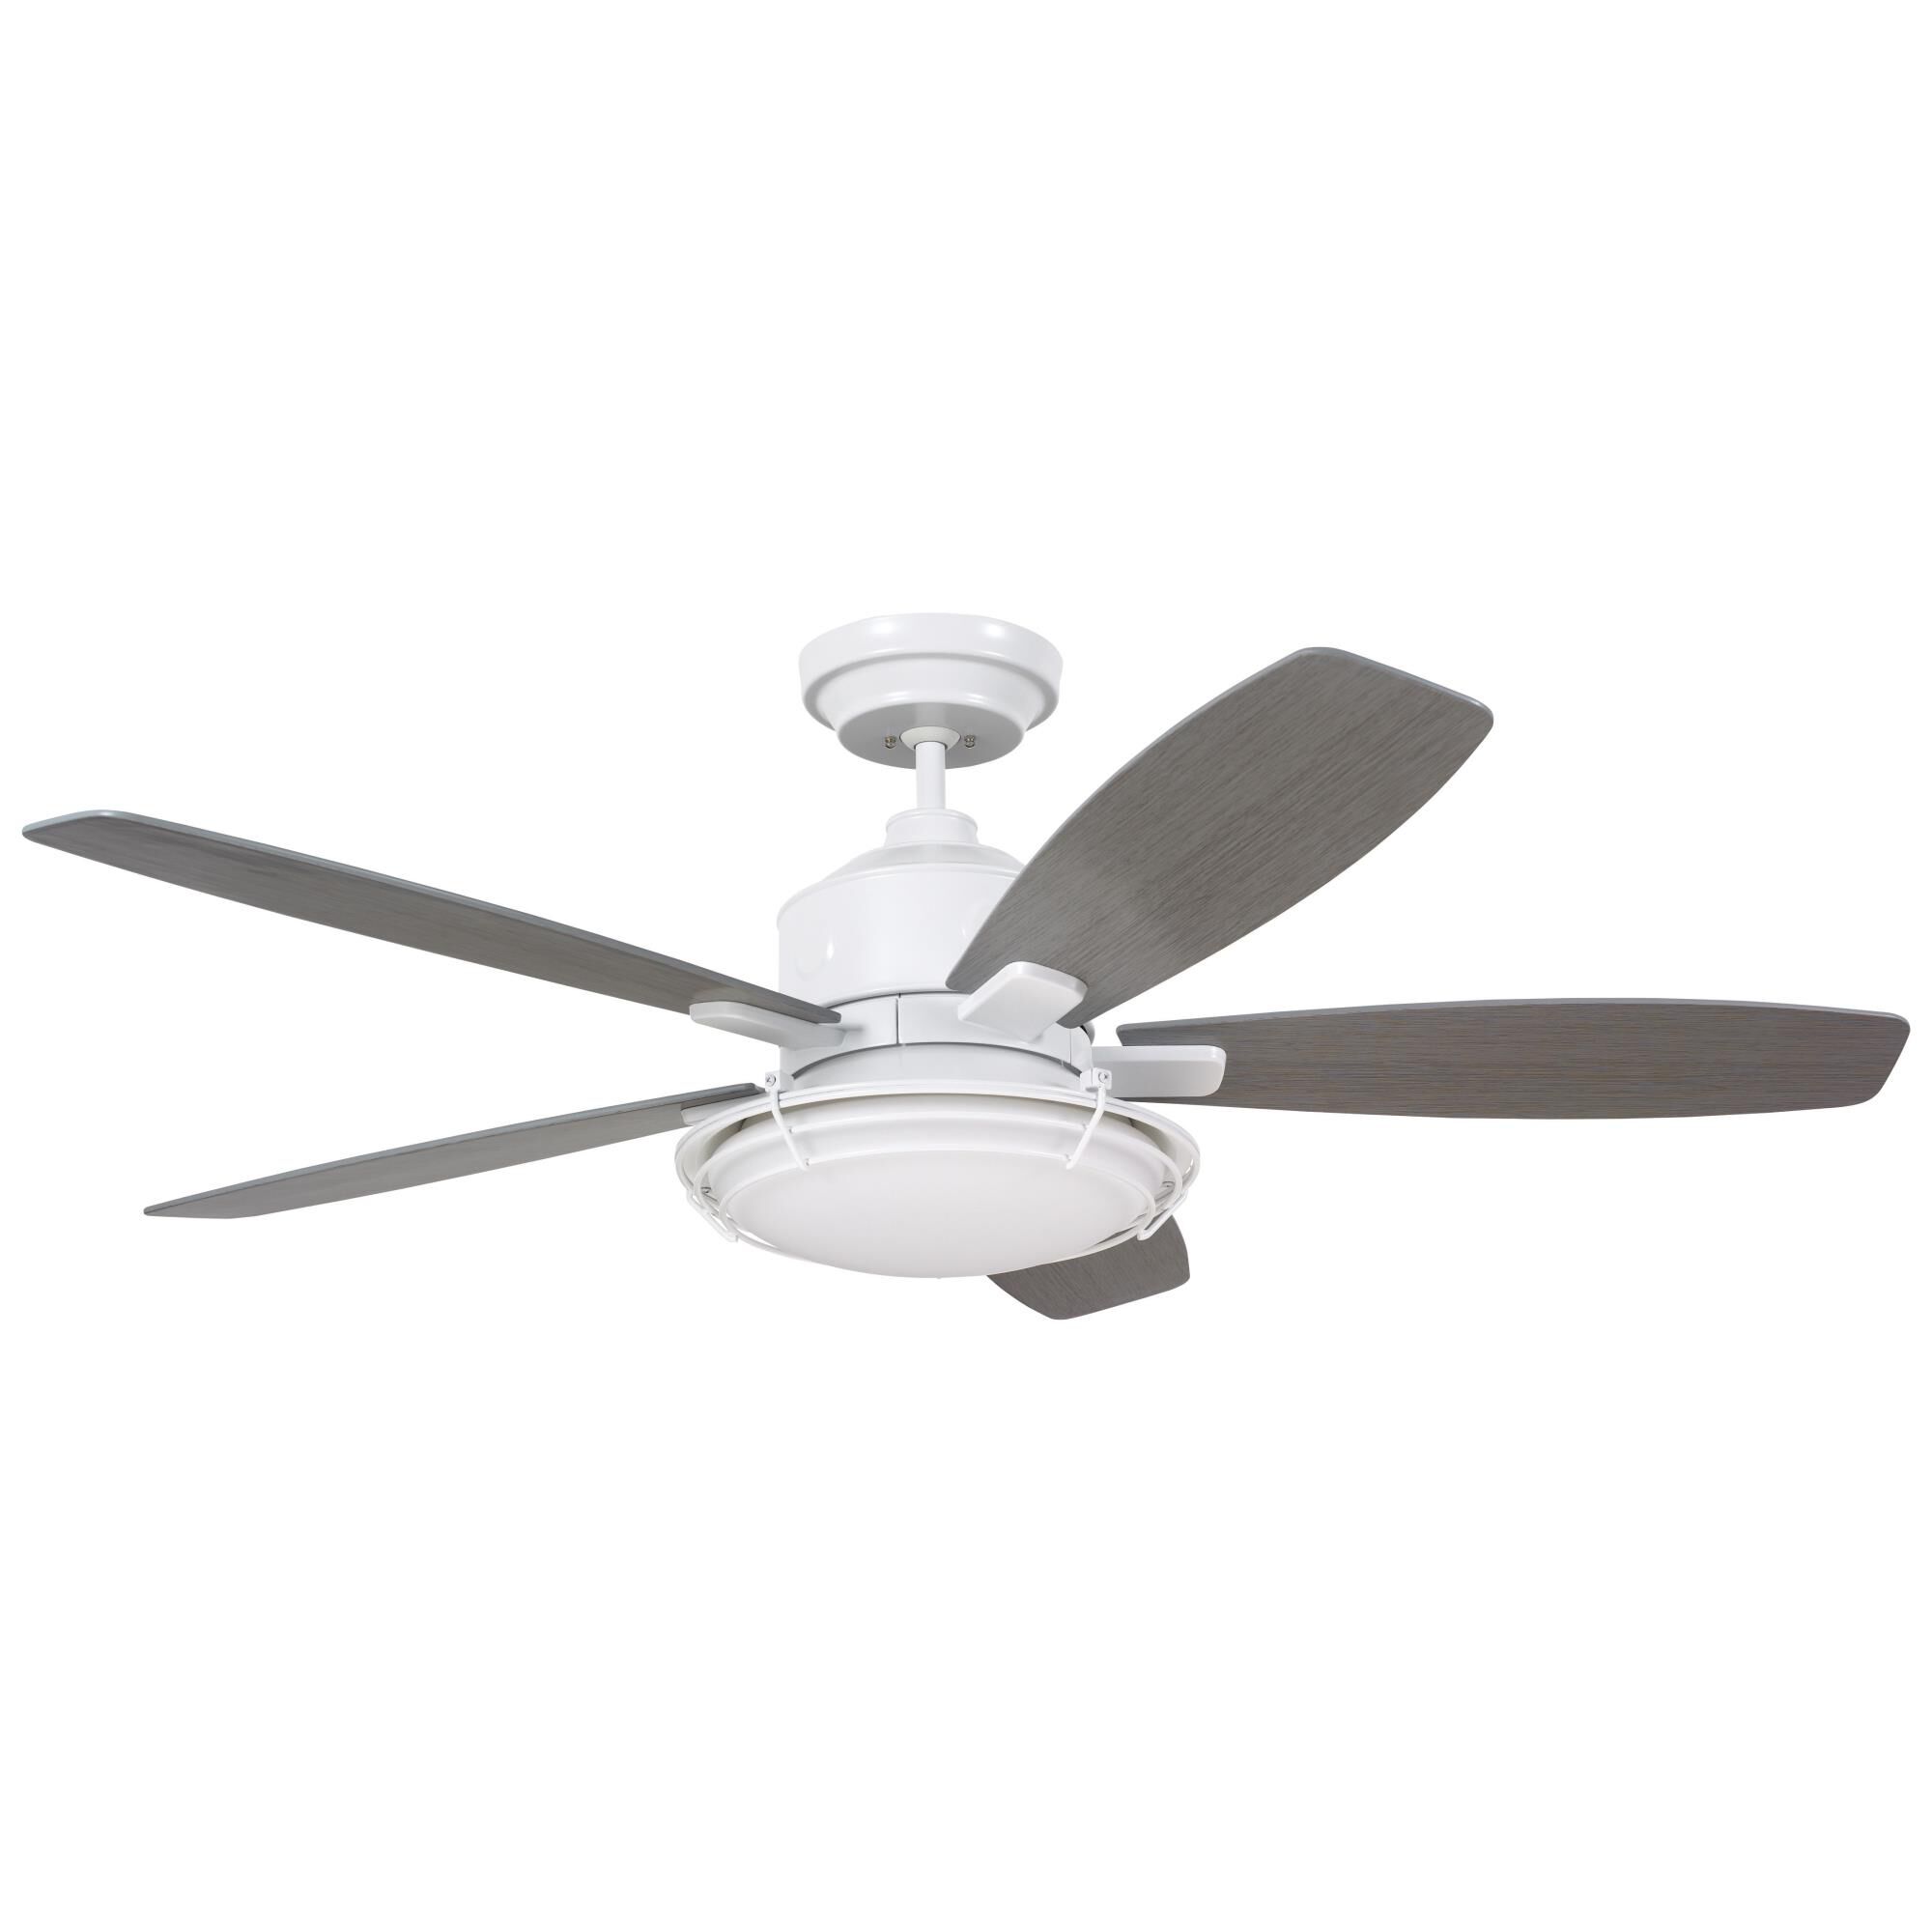 Rockpointe Outdoor Rated 54 Inch Ceiling Fan with Light Kit | Capitol  Lighting 